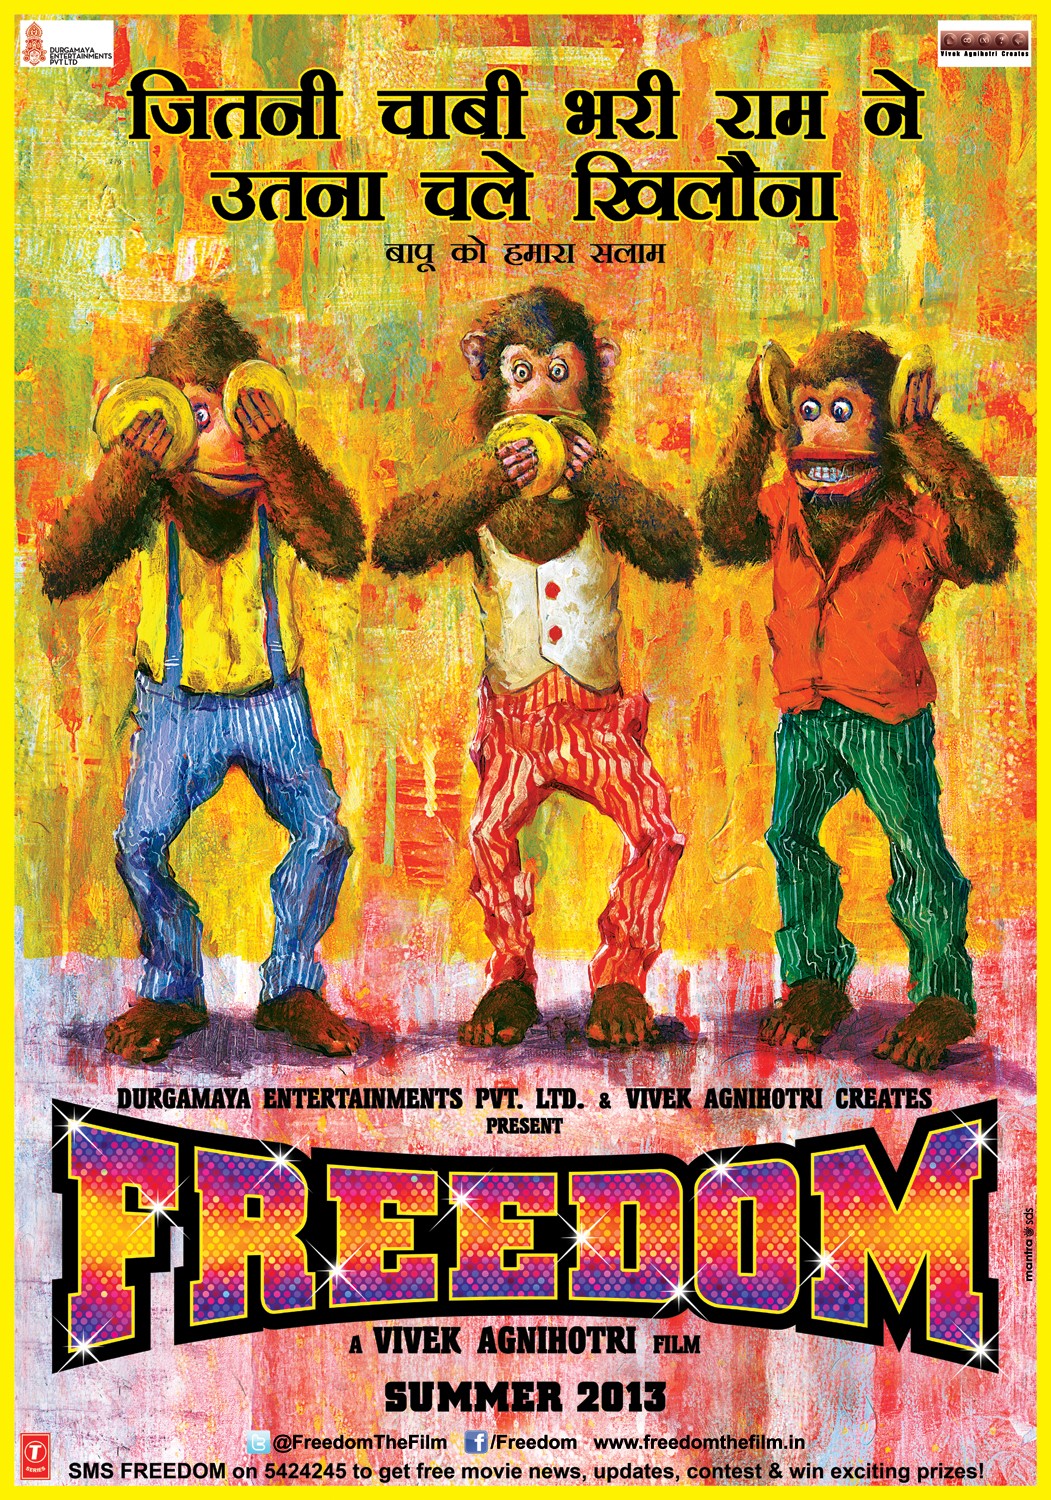 Extra Large Movie Poster Image for Freedom 